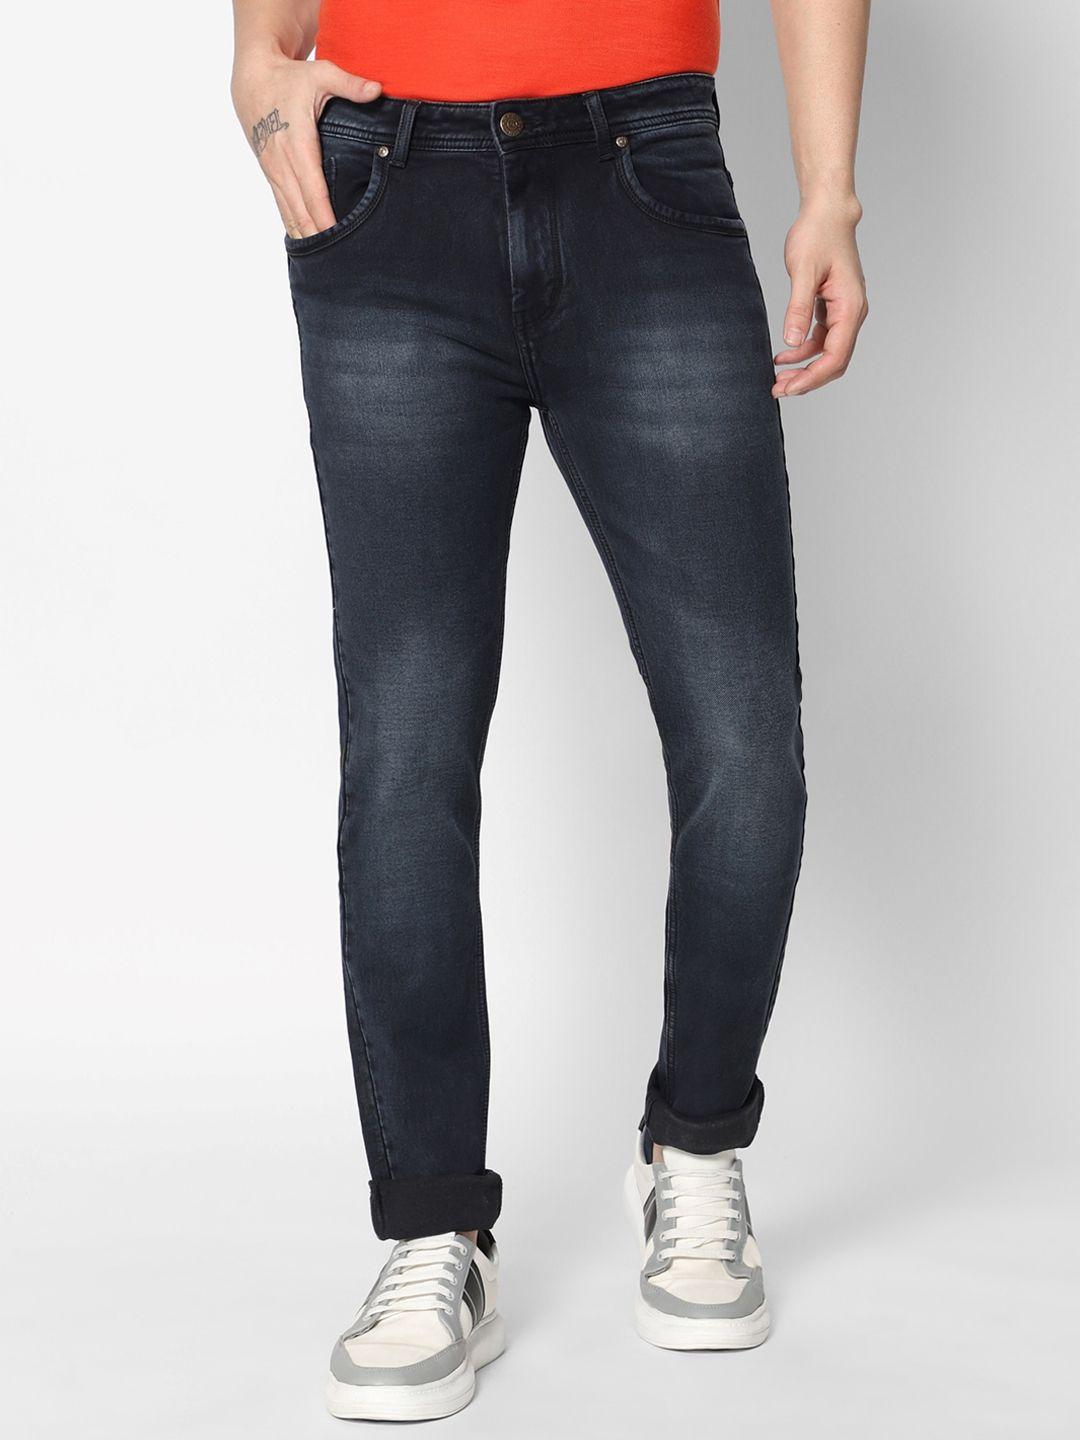 hj-hasasi-men-grey-light-fade-stretchable-jeans